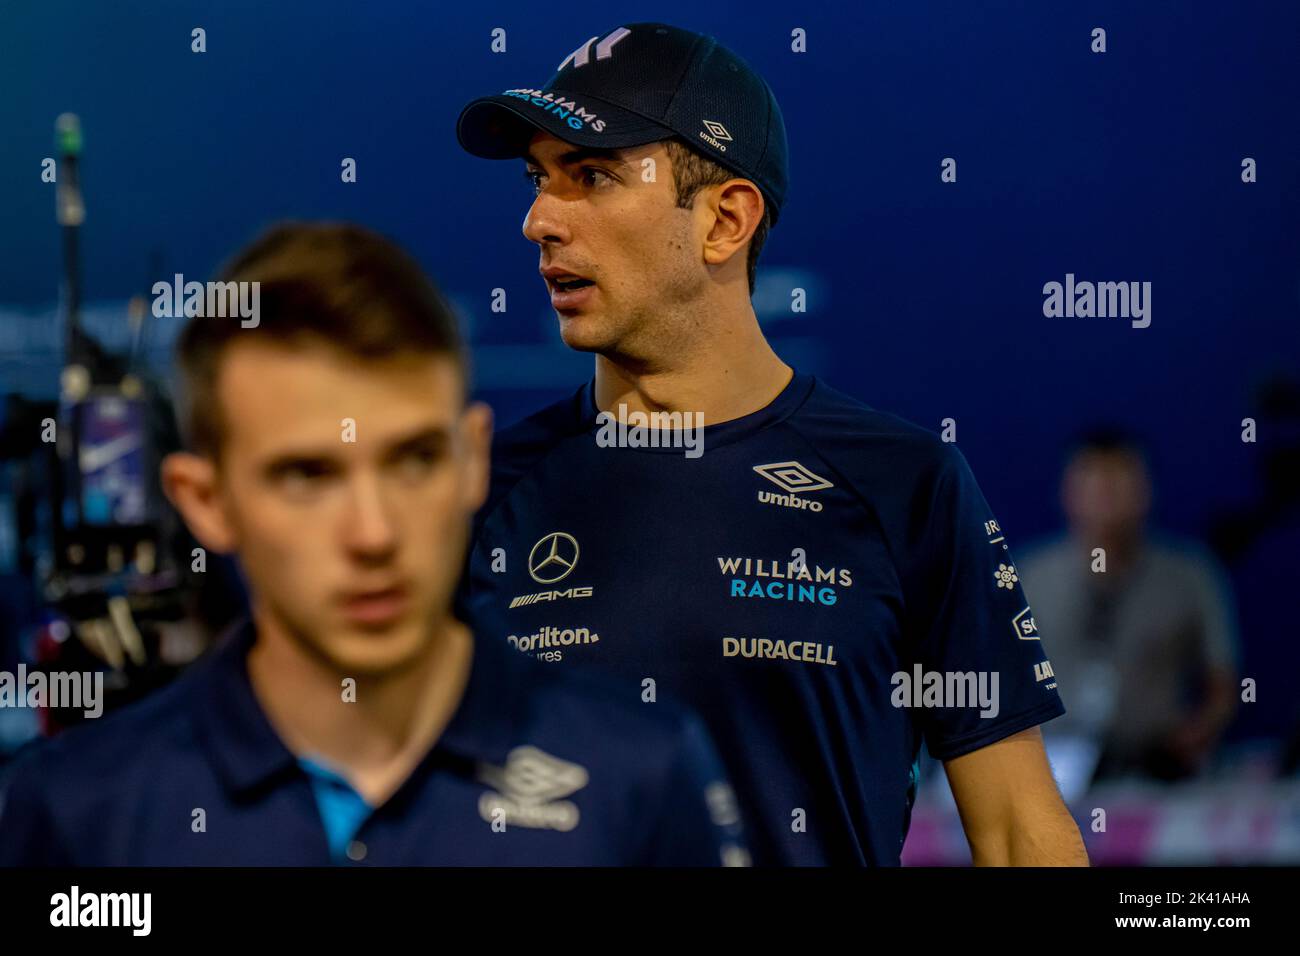 Marina Bay, Singapore, 29th Sep 2022, Nicholas Latifi, from Canada competes for Williams Racing. The build up, round 17 of the 2022 Formula 1 championship. Credit: Michael Potts/Alamy Live News Stock Photo